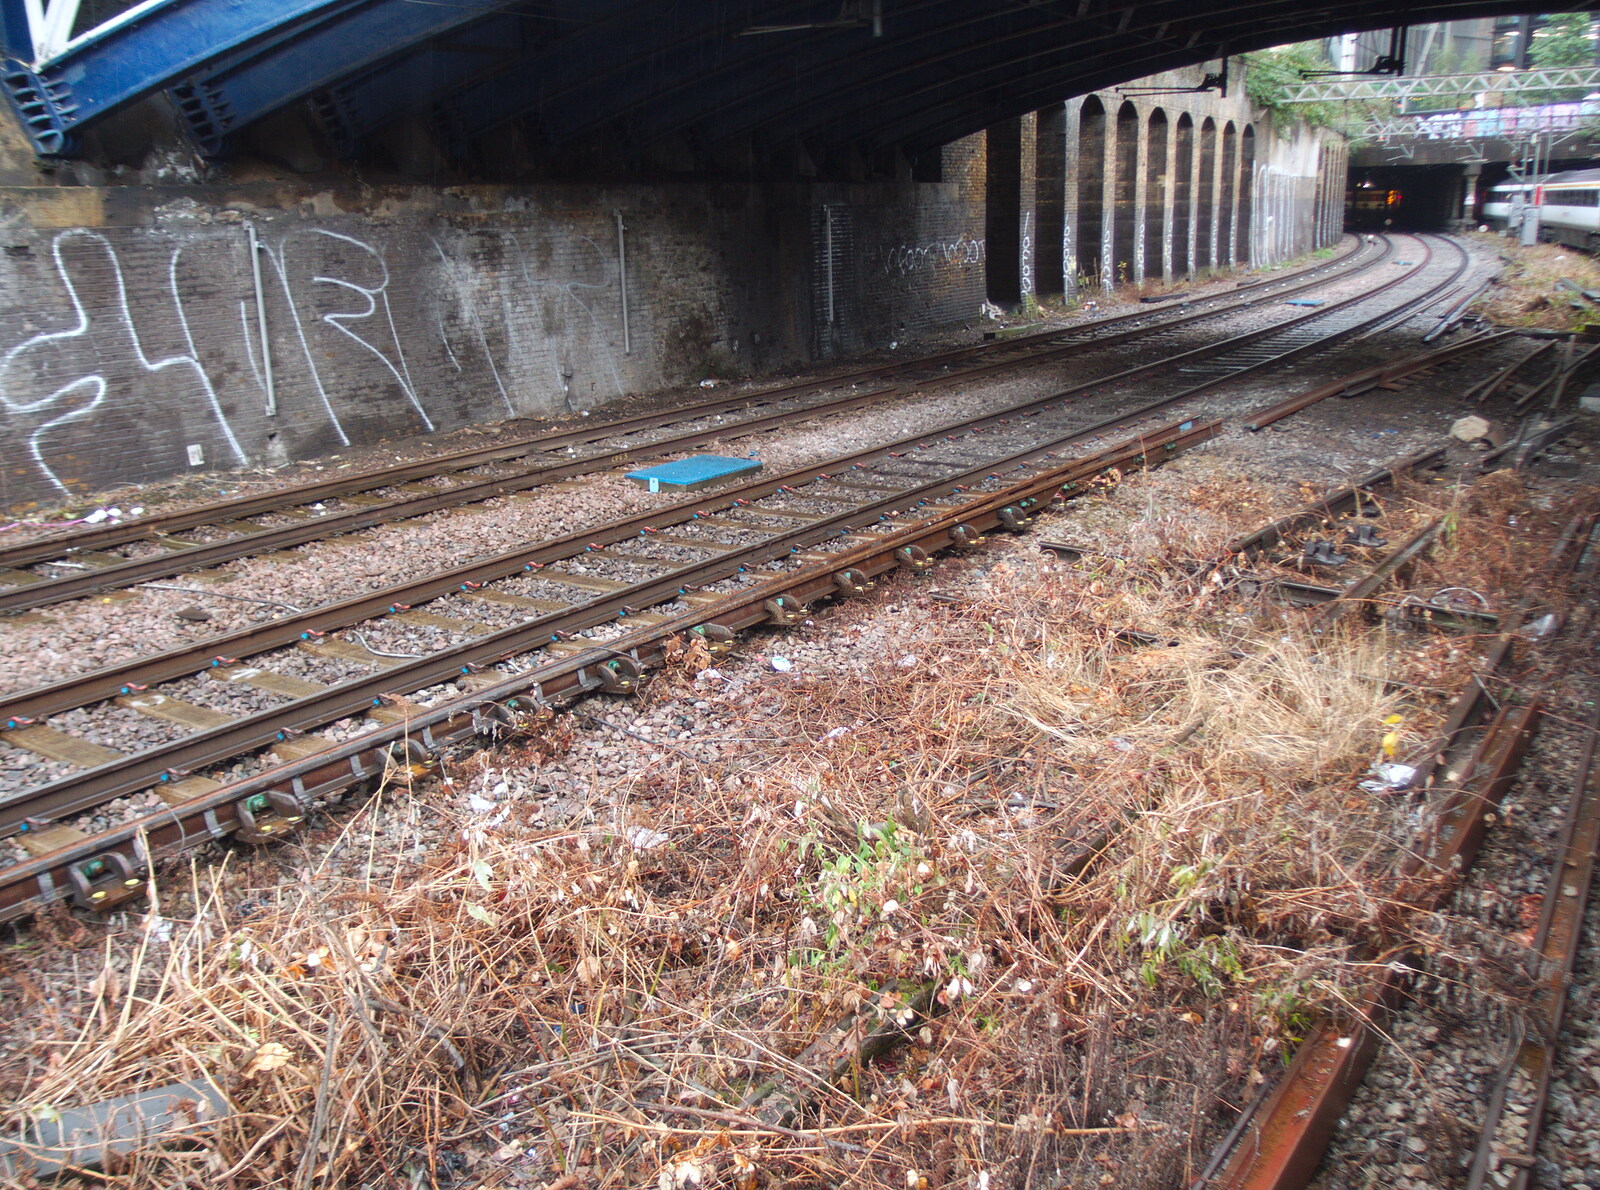 Parched weeds outside Liverpool Street station from Fred's Birthday and a GSB Duck-Race Miscellany, Brome, Eye and London - 28th September 2019